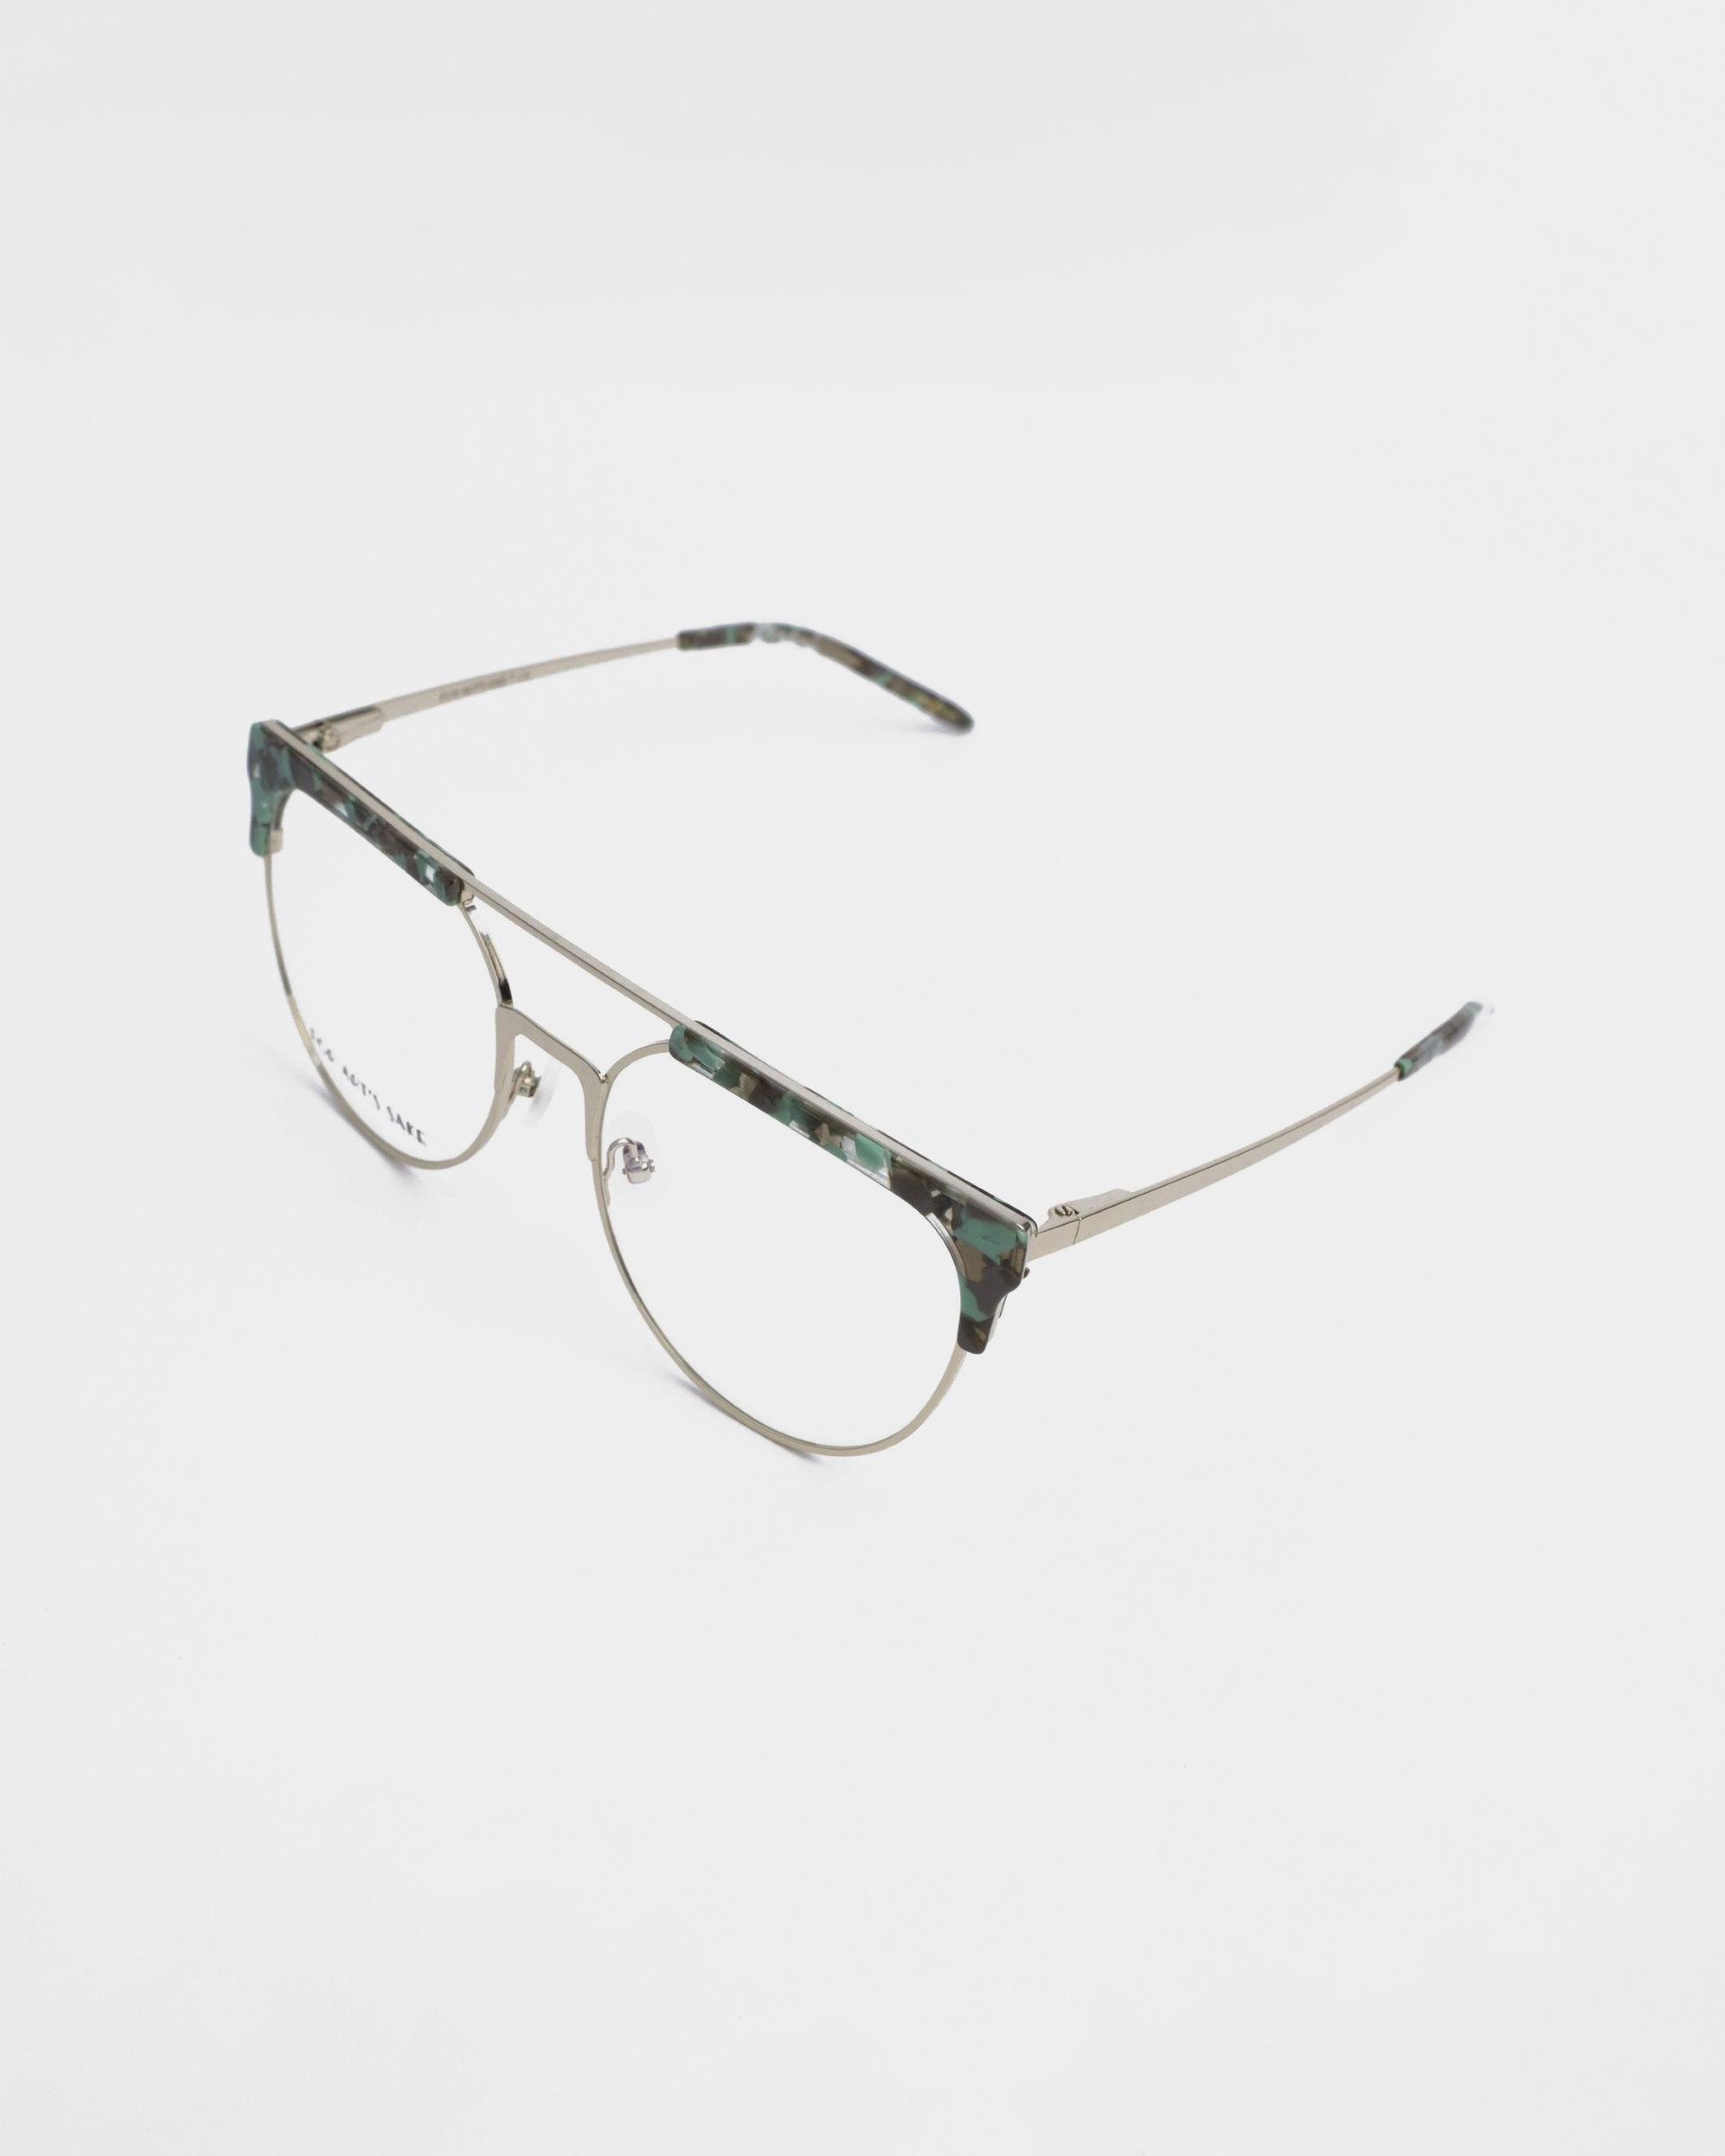 A pair of For Art's Sake® Frosty prescription glasses featuring thin metallic frames with a camouflage-patterned brow line and bridge. The earpieces are slim and also metallic, with matching camouflage accents on the tips. The clear, rectangular lenses offer both UV protection and a blue light filter for added eye comfort.